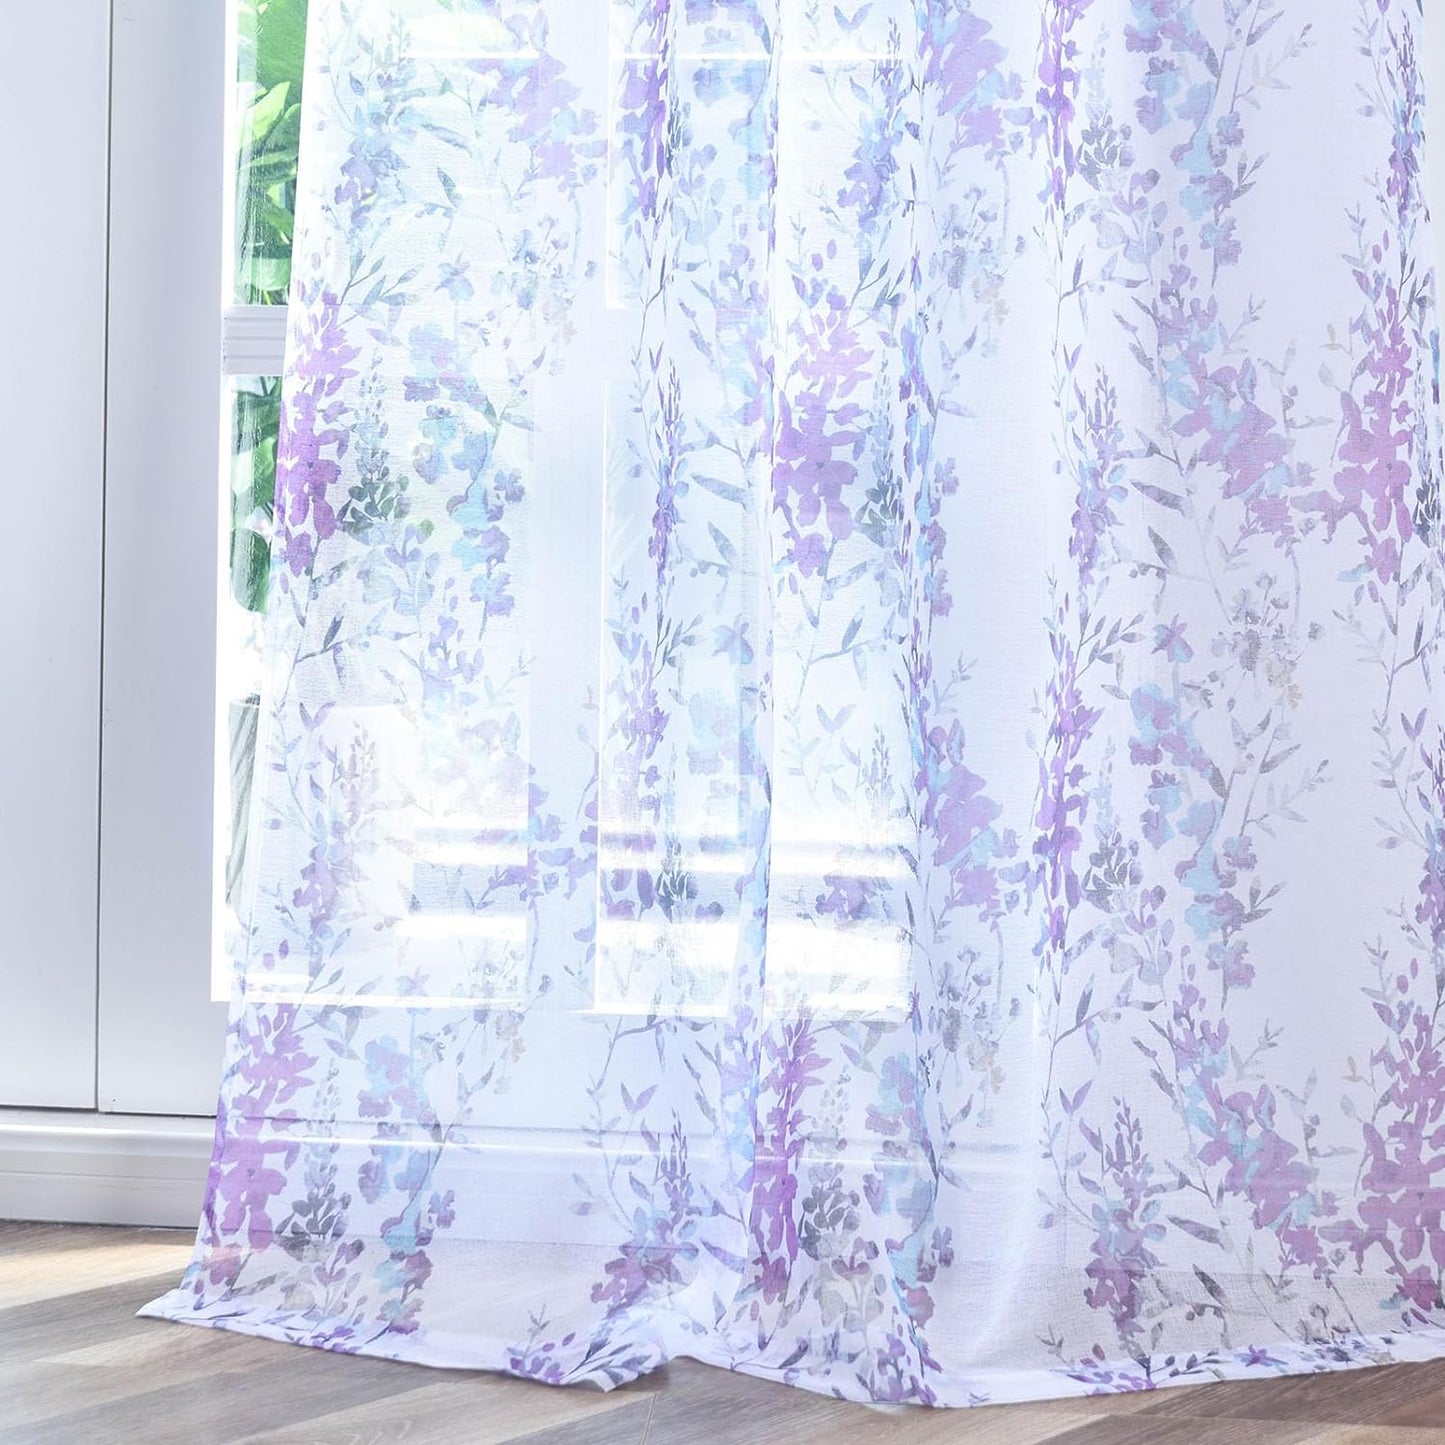 Kotile Purple White Sheer Curtains, Country Branch Leaf Print Sheer Curtains 63 Inch Length for Bedroom, Rod Pocket Privacy Floral Sheer Window Curtains, 50 X 63 Inch, 2 Panels, Purple  Kotile Textile Purple W50 X L96 Inch 